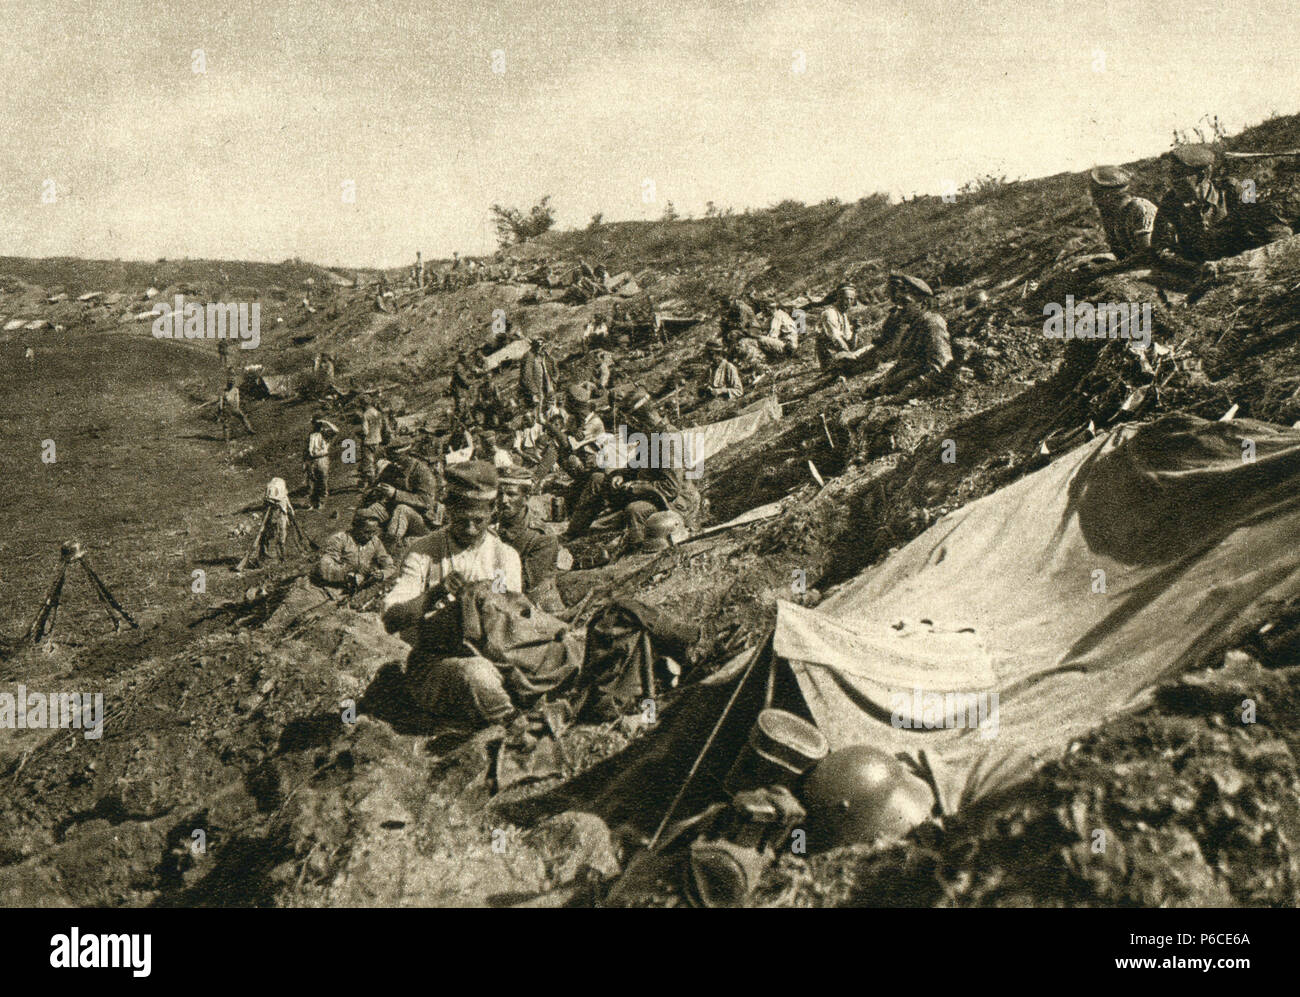 infantry, German soldiers, eastern front, ww1, wwi, world war one Stock Photo